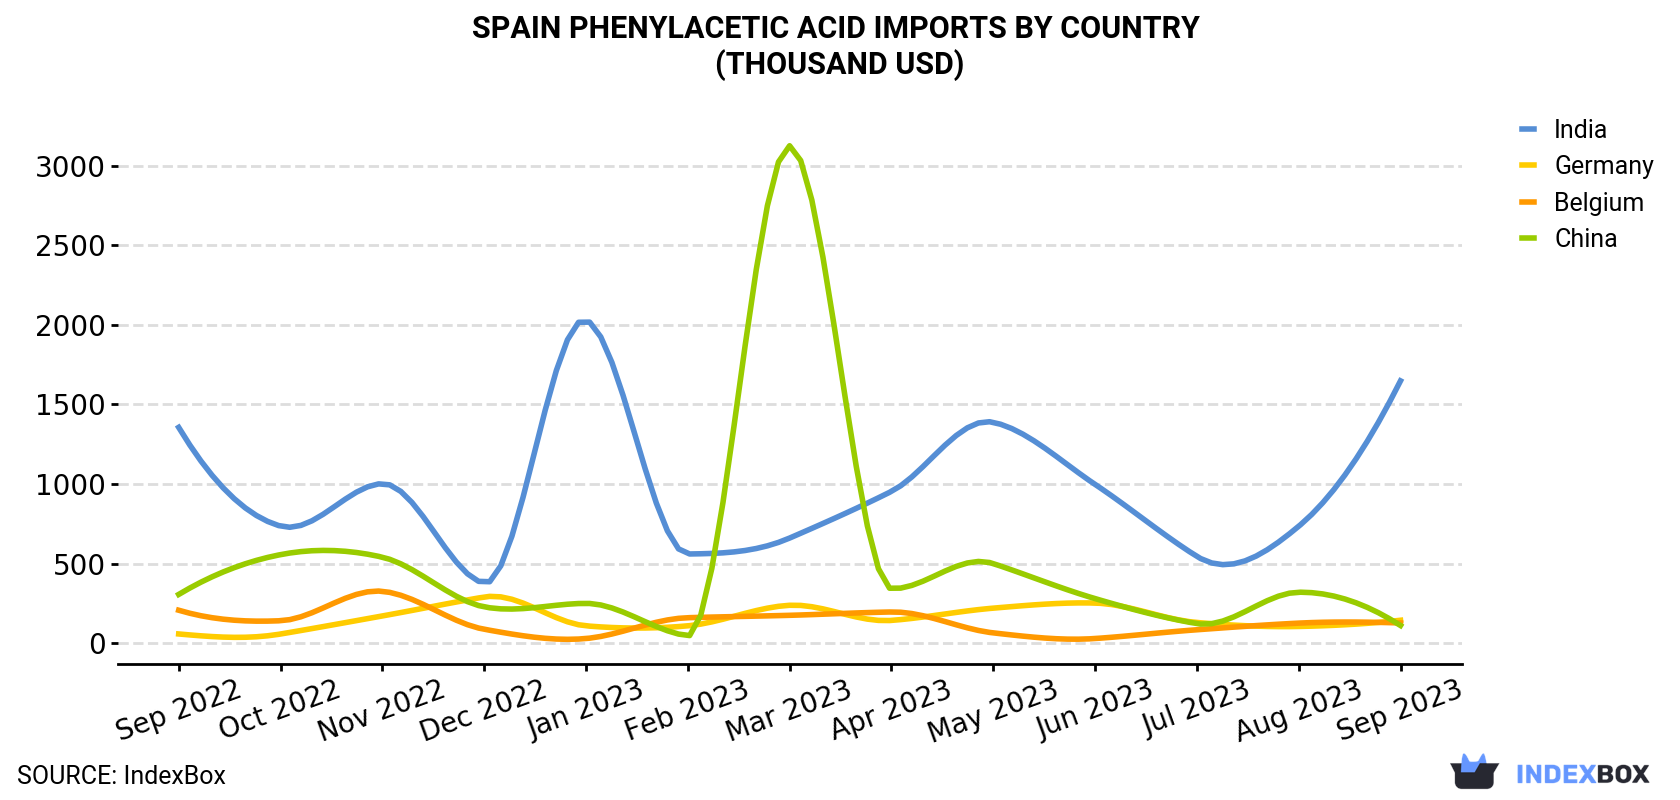 Spain Phenylacetic Acid Imports By Country (Thousand USD)